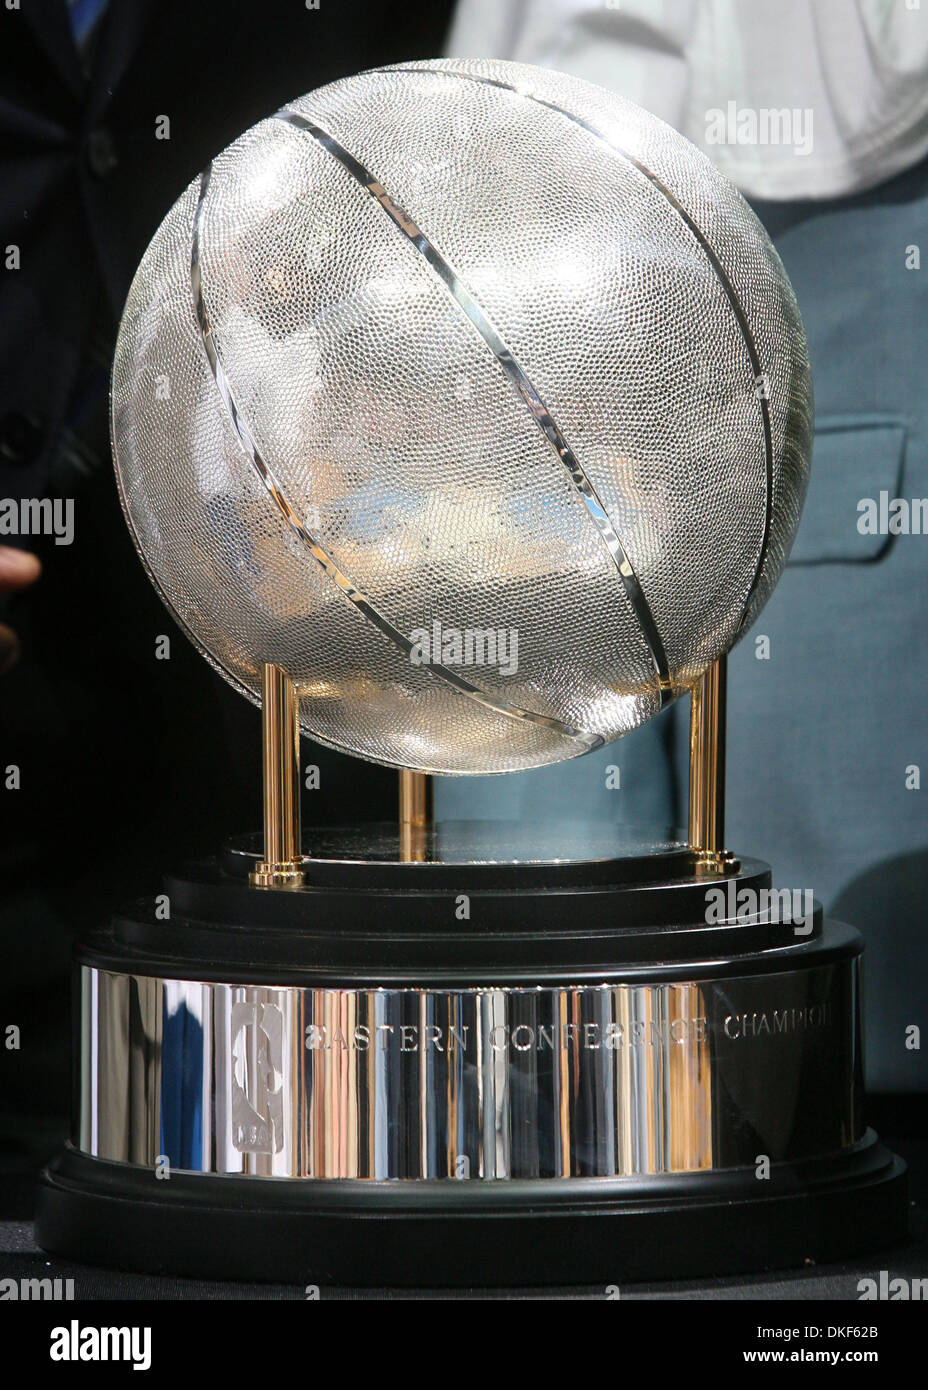 May 30, 2009 - Orlando, Florida, USA - The Eastern Conference Championship trophy. Amway Arena in Orlando, FL Saturday, May 30, 2009. (Credit Image: © Gary W. Green/Orlando Sentinel/ZUMA Press) RESTRICTIONS: * Daytona and Online RIGHTS OUT * Stock Photo